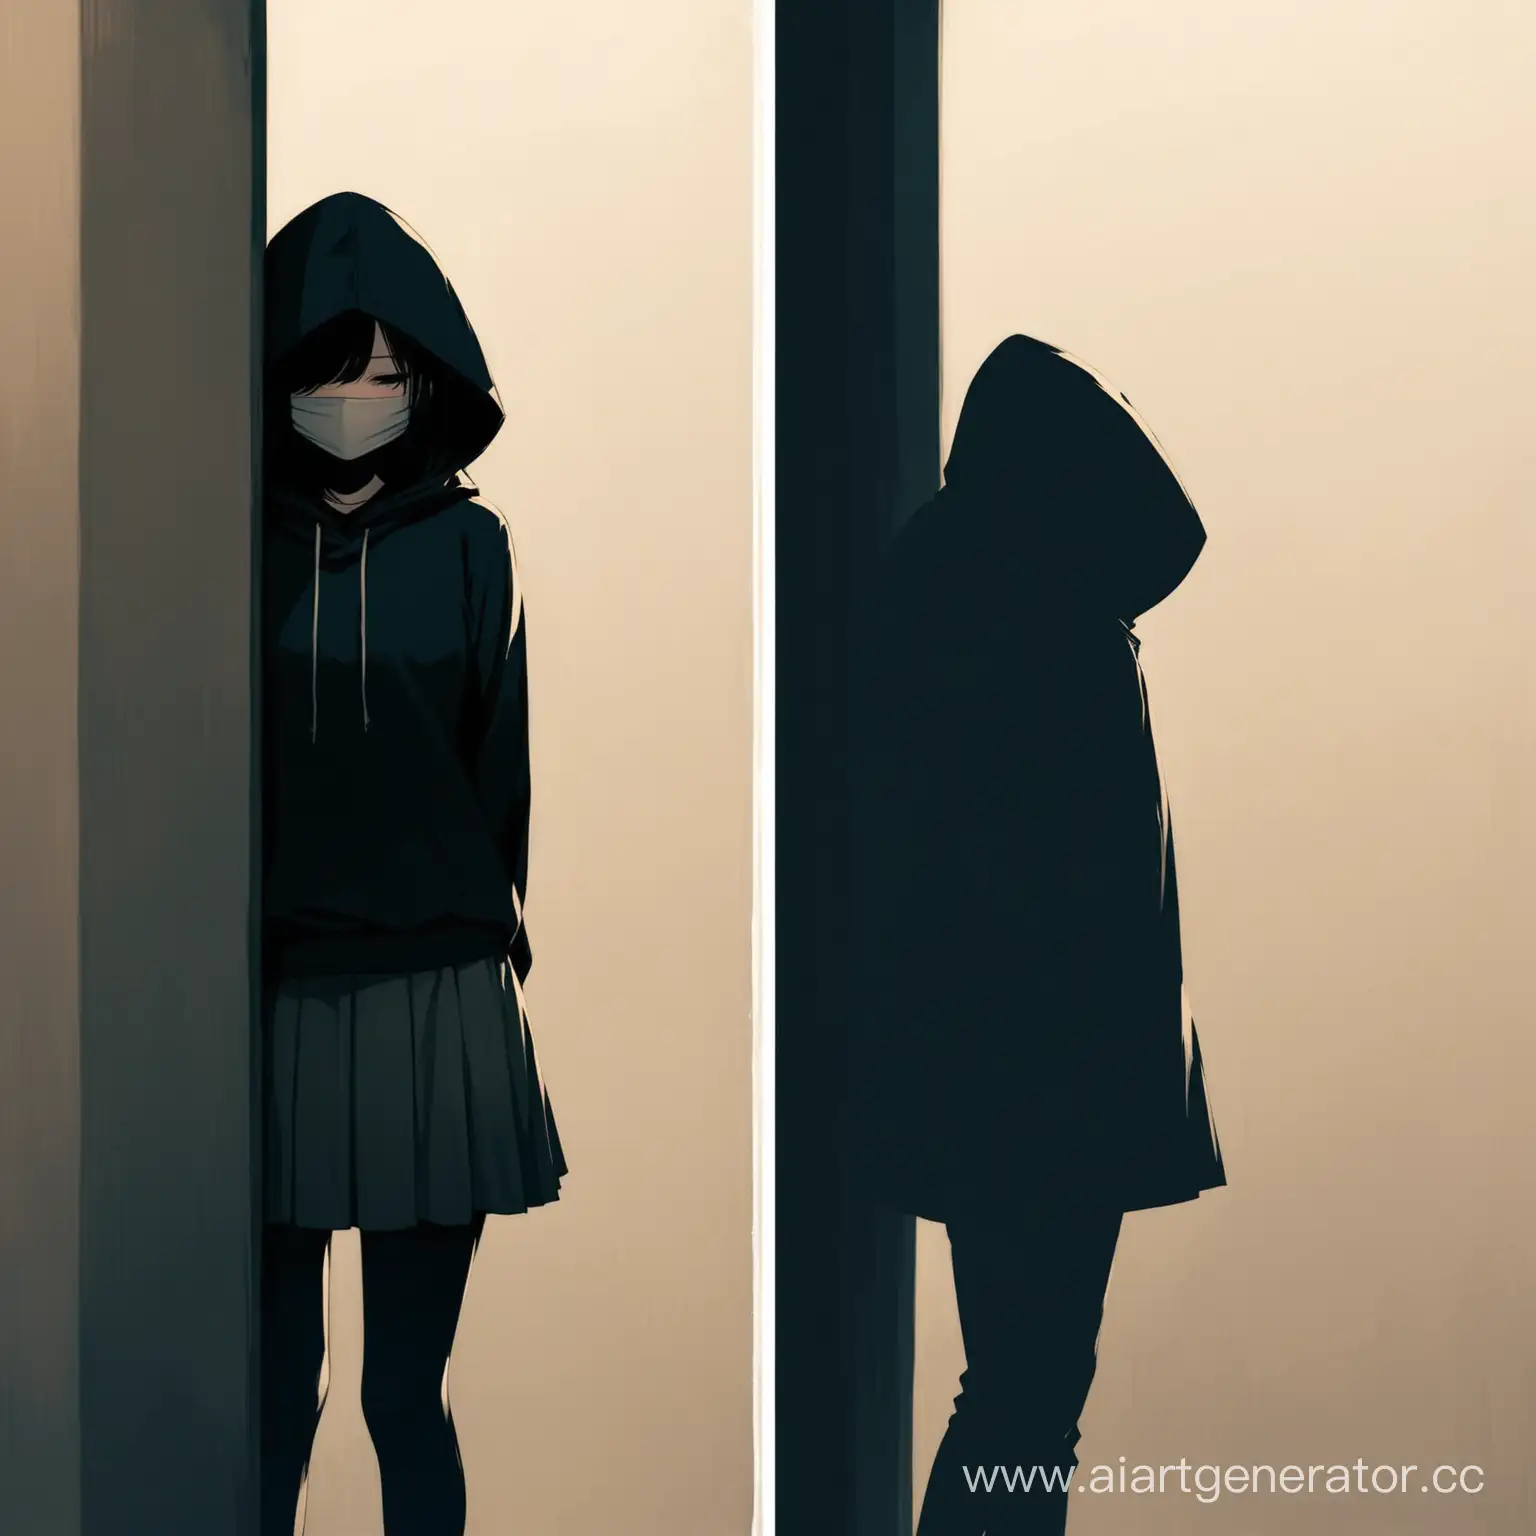 Urban-Encounter-Mysterious-Hooded-Figure-and-Girl-in-Skirt